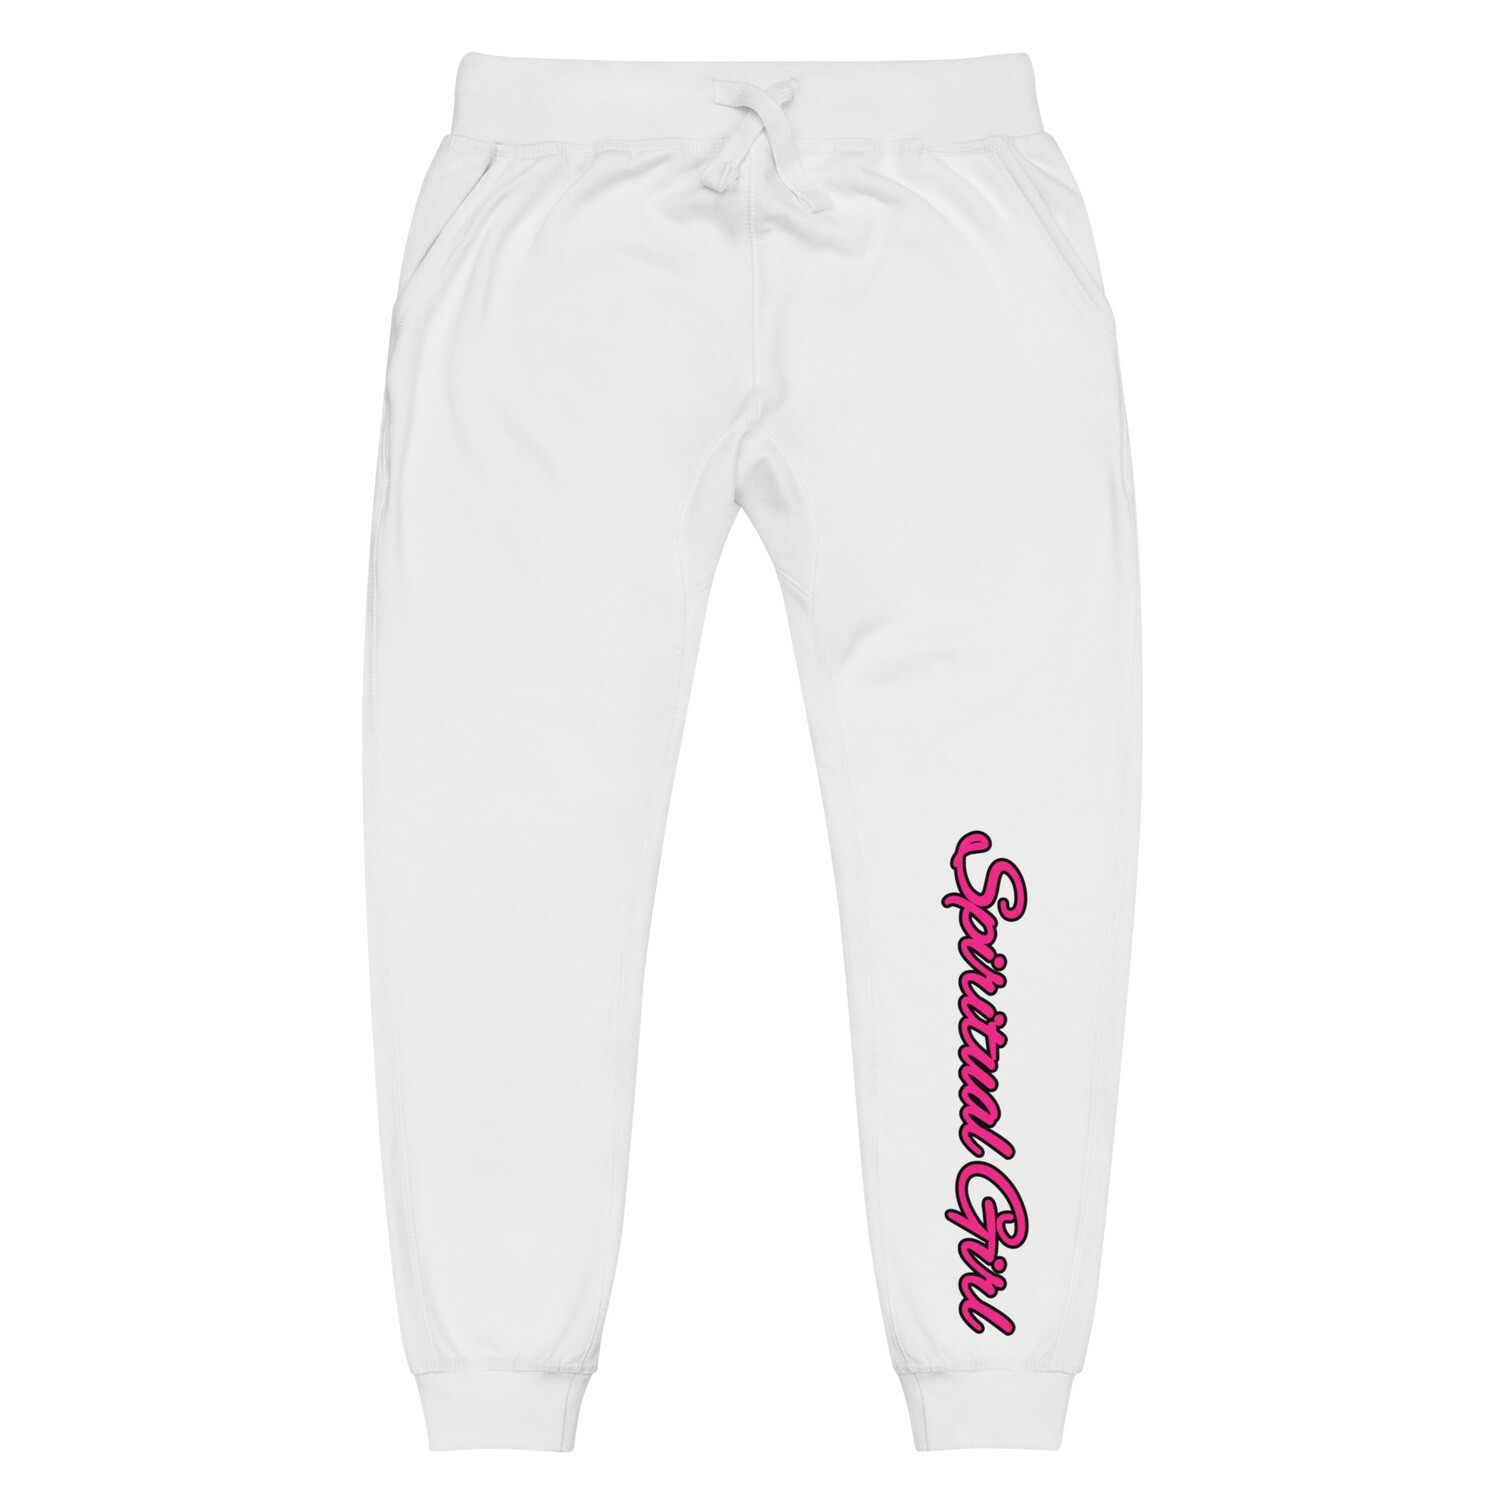 Spiritual Girl Athletic Sweatpants (With 9 Colors & Sizes: XSmall-2XL)